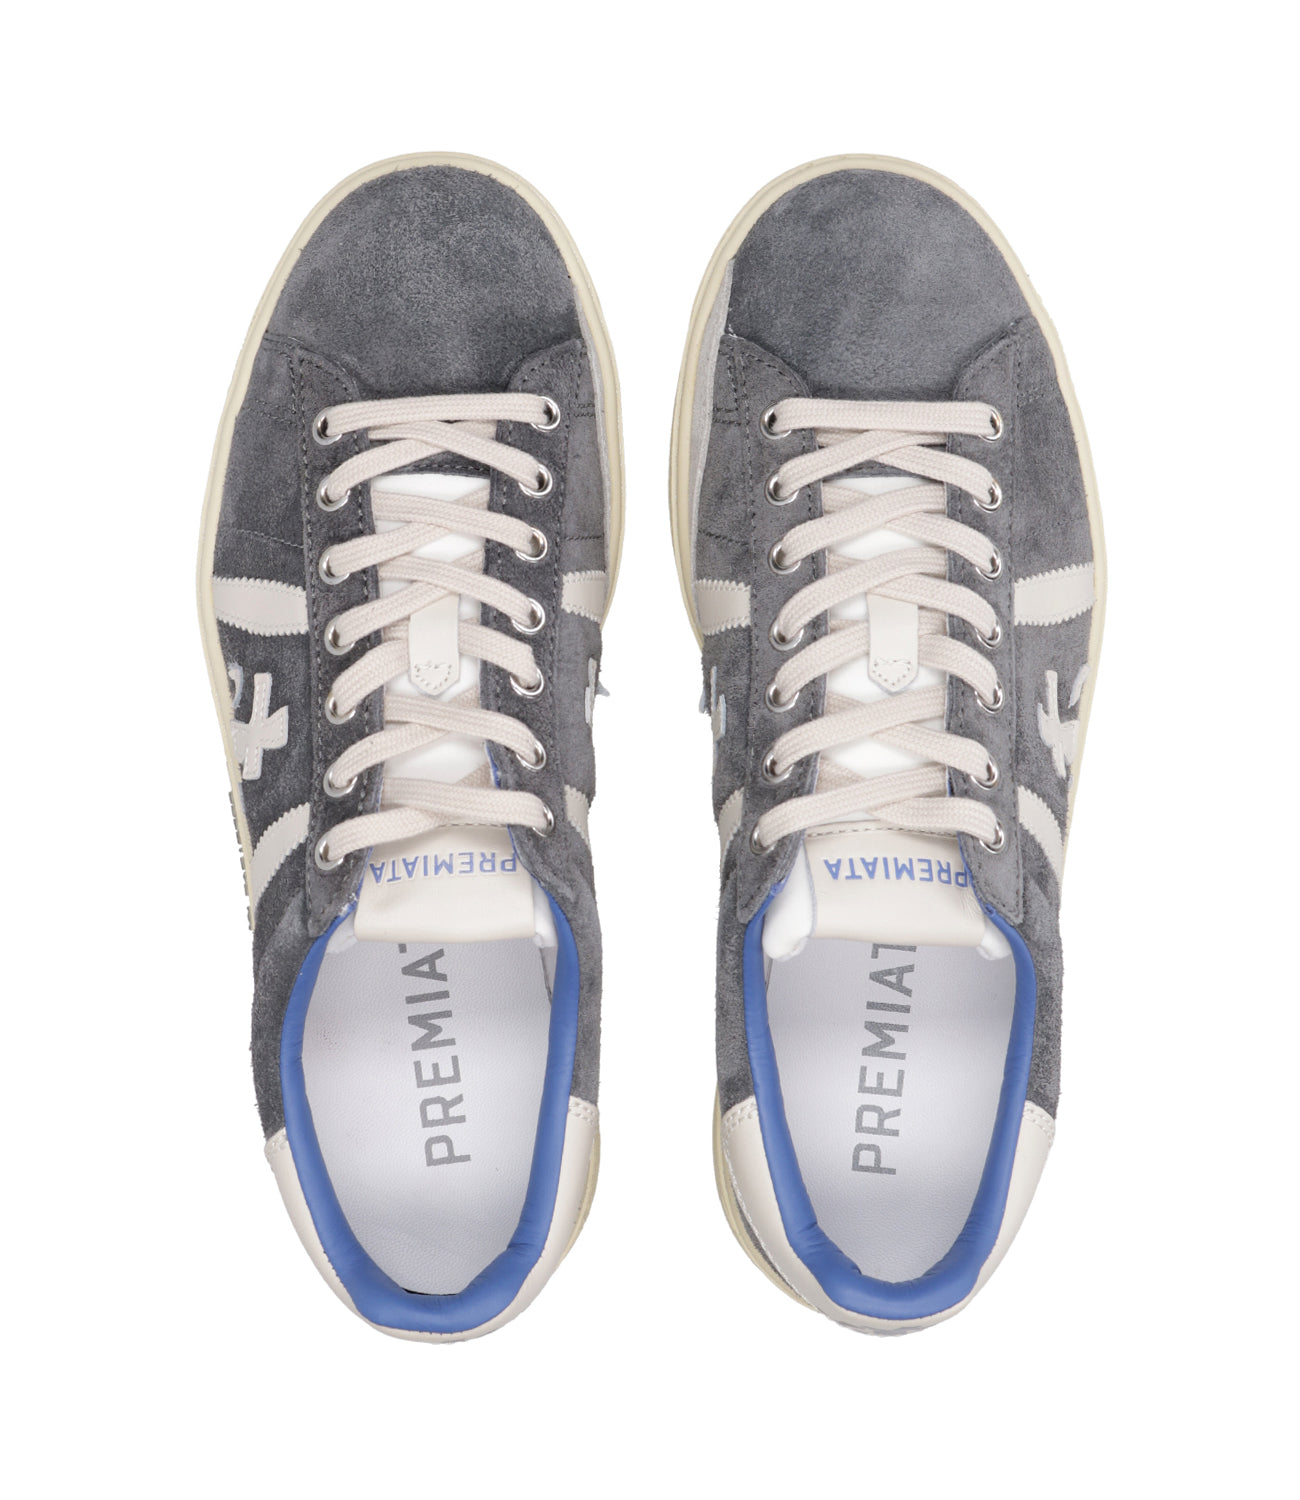 Premiata | Russel Grey and White Sneakers